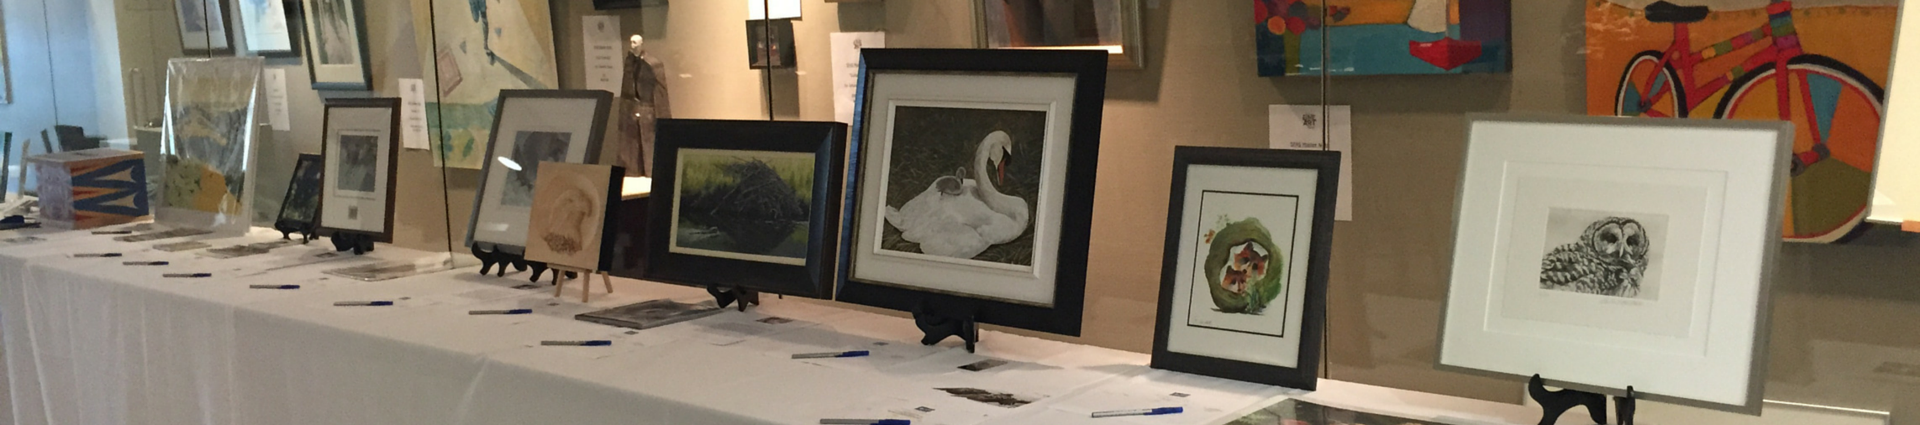 Image of the Art for Nature Auction table